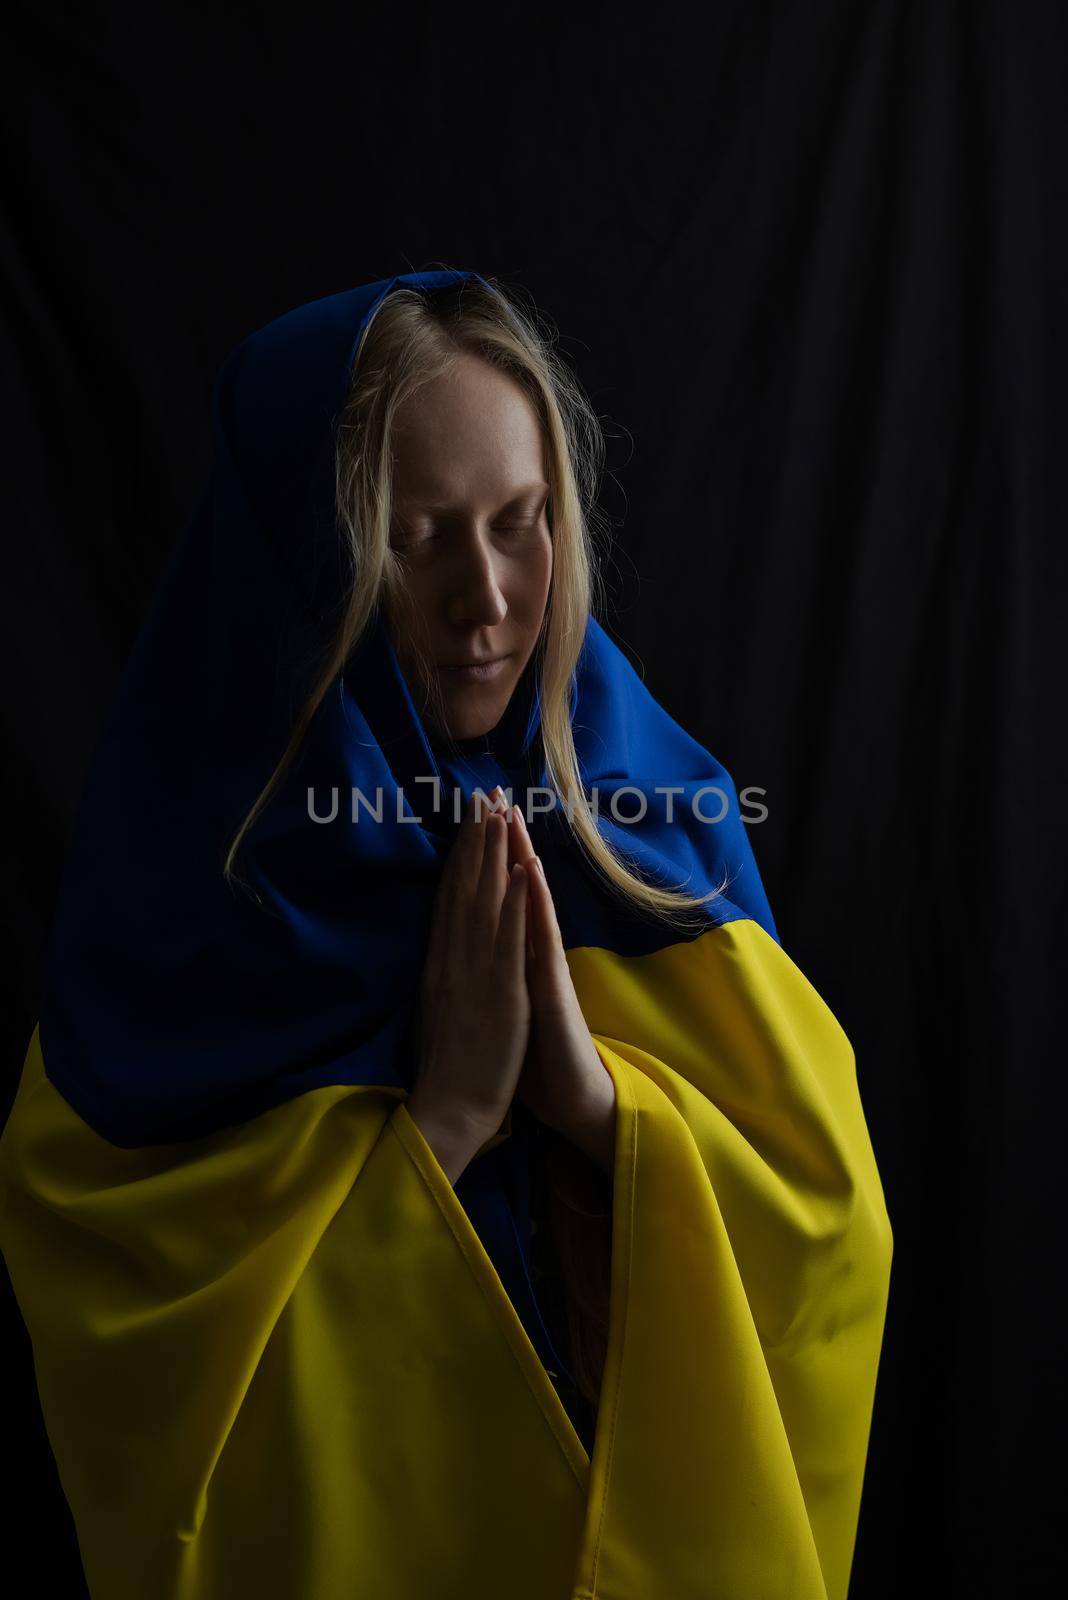 Ukrainian blonde woman prays with closed eyes for Ukraine during the war with the state flag on her head. Russia attacked Ukraine on February 24, 2022